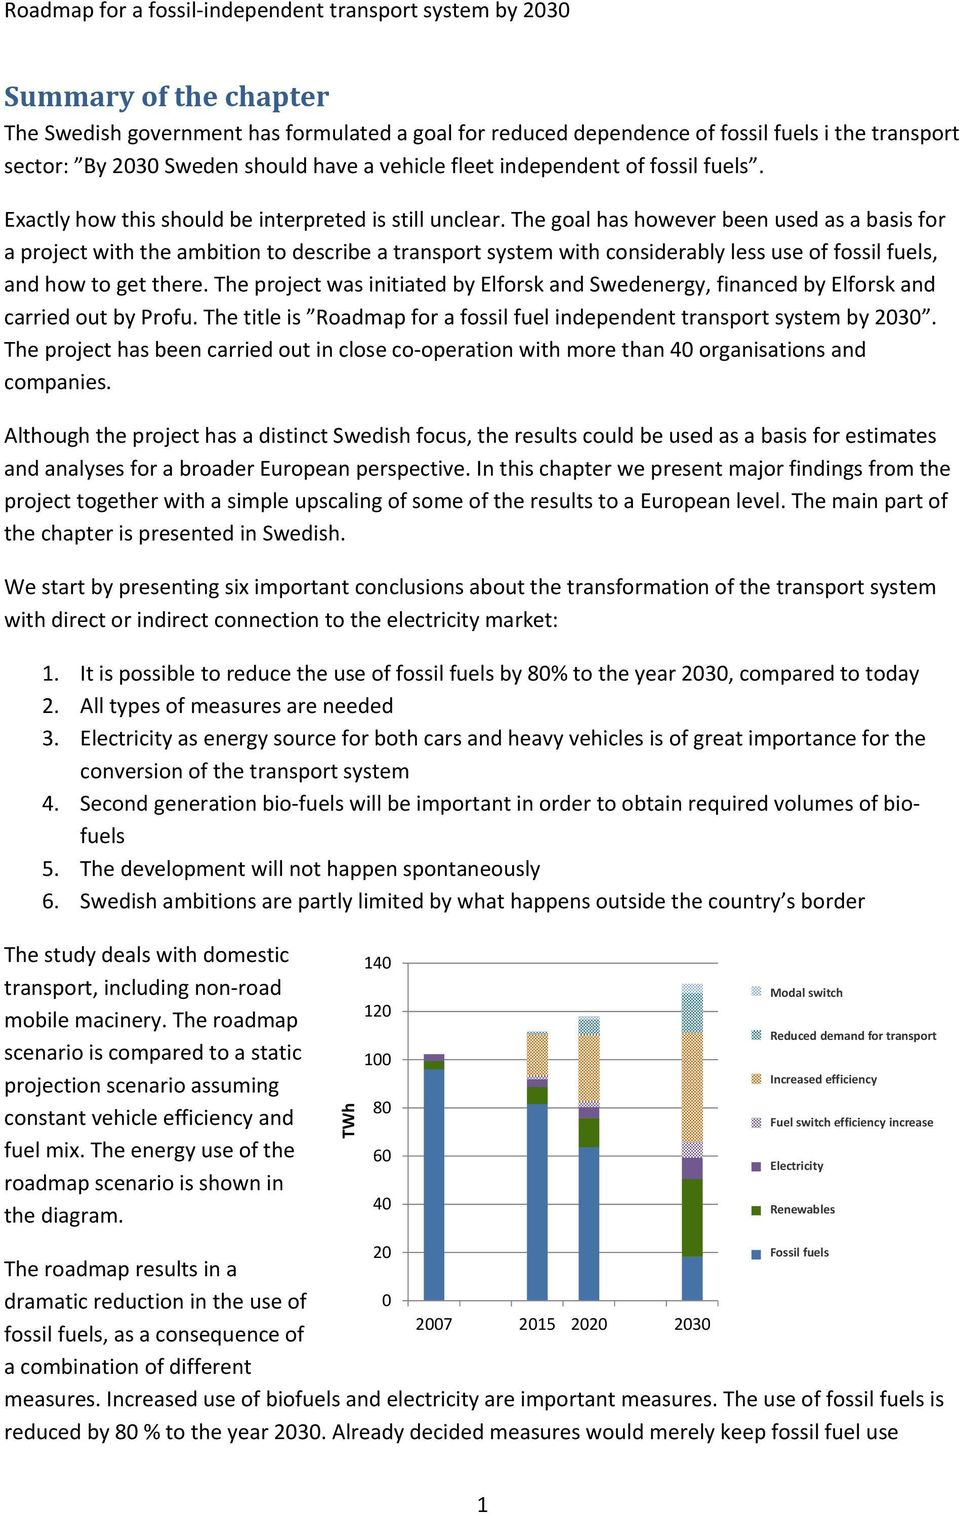 The goal has however been used as a basis for a project with the ambition to describe a transport system with considerably less use of fossil fuels, and how to get there.